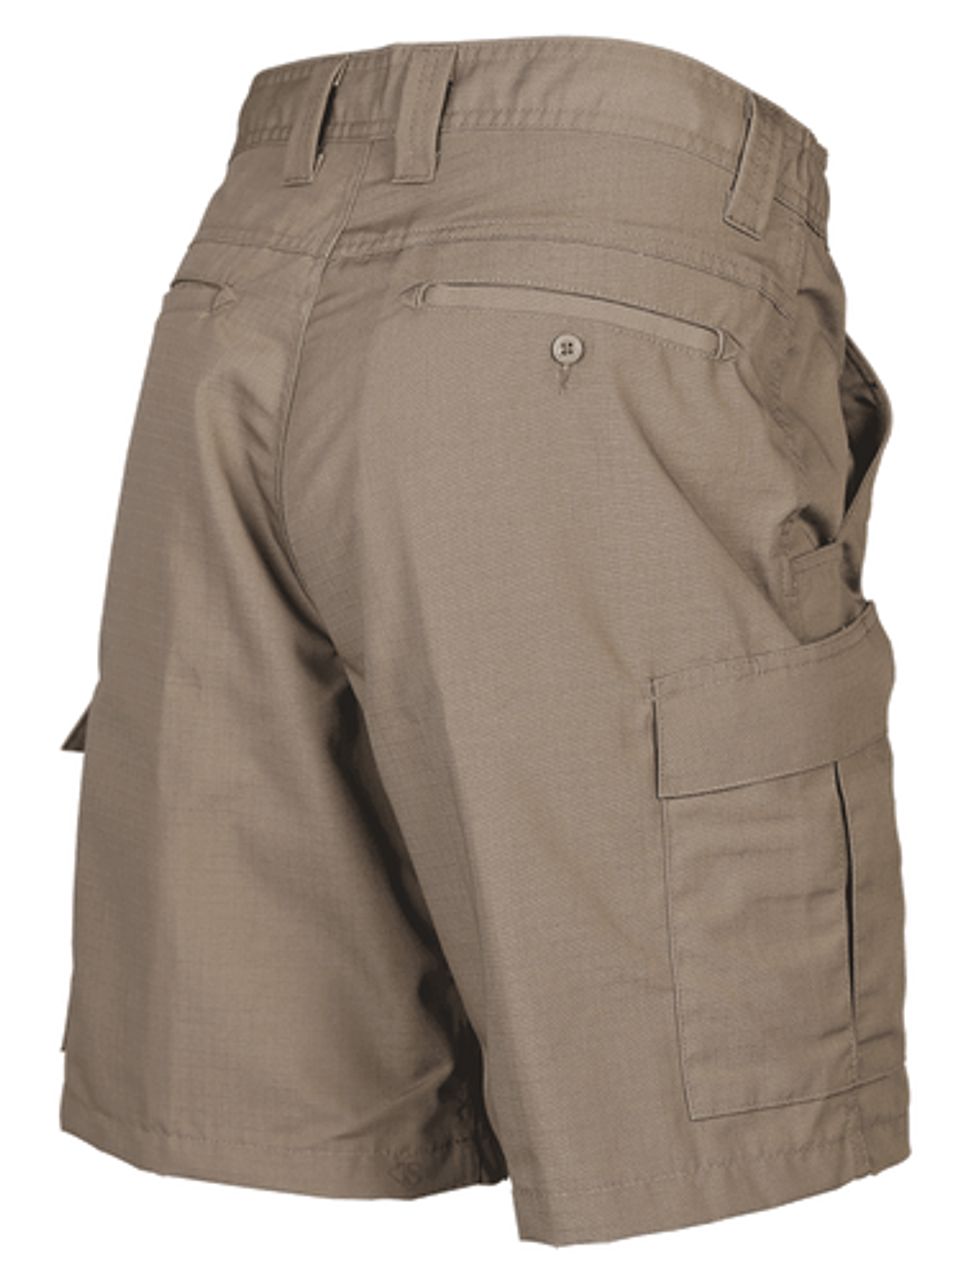 Tru-Spec TS-4231 24-7 SERIES Men's Simply Tactical Cargo Shorts, Casual, Polyester/Cotton Rip-Stop,  2-deep front slashed pockets with a reinforced bridge at the bottom designed to securely hold a tactical knife